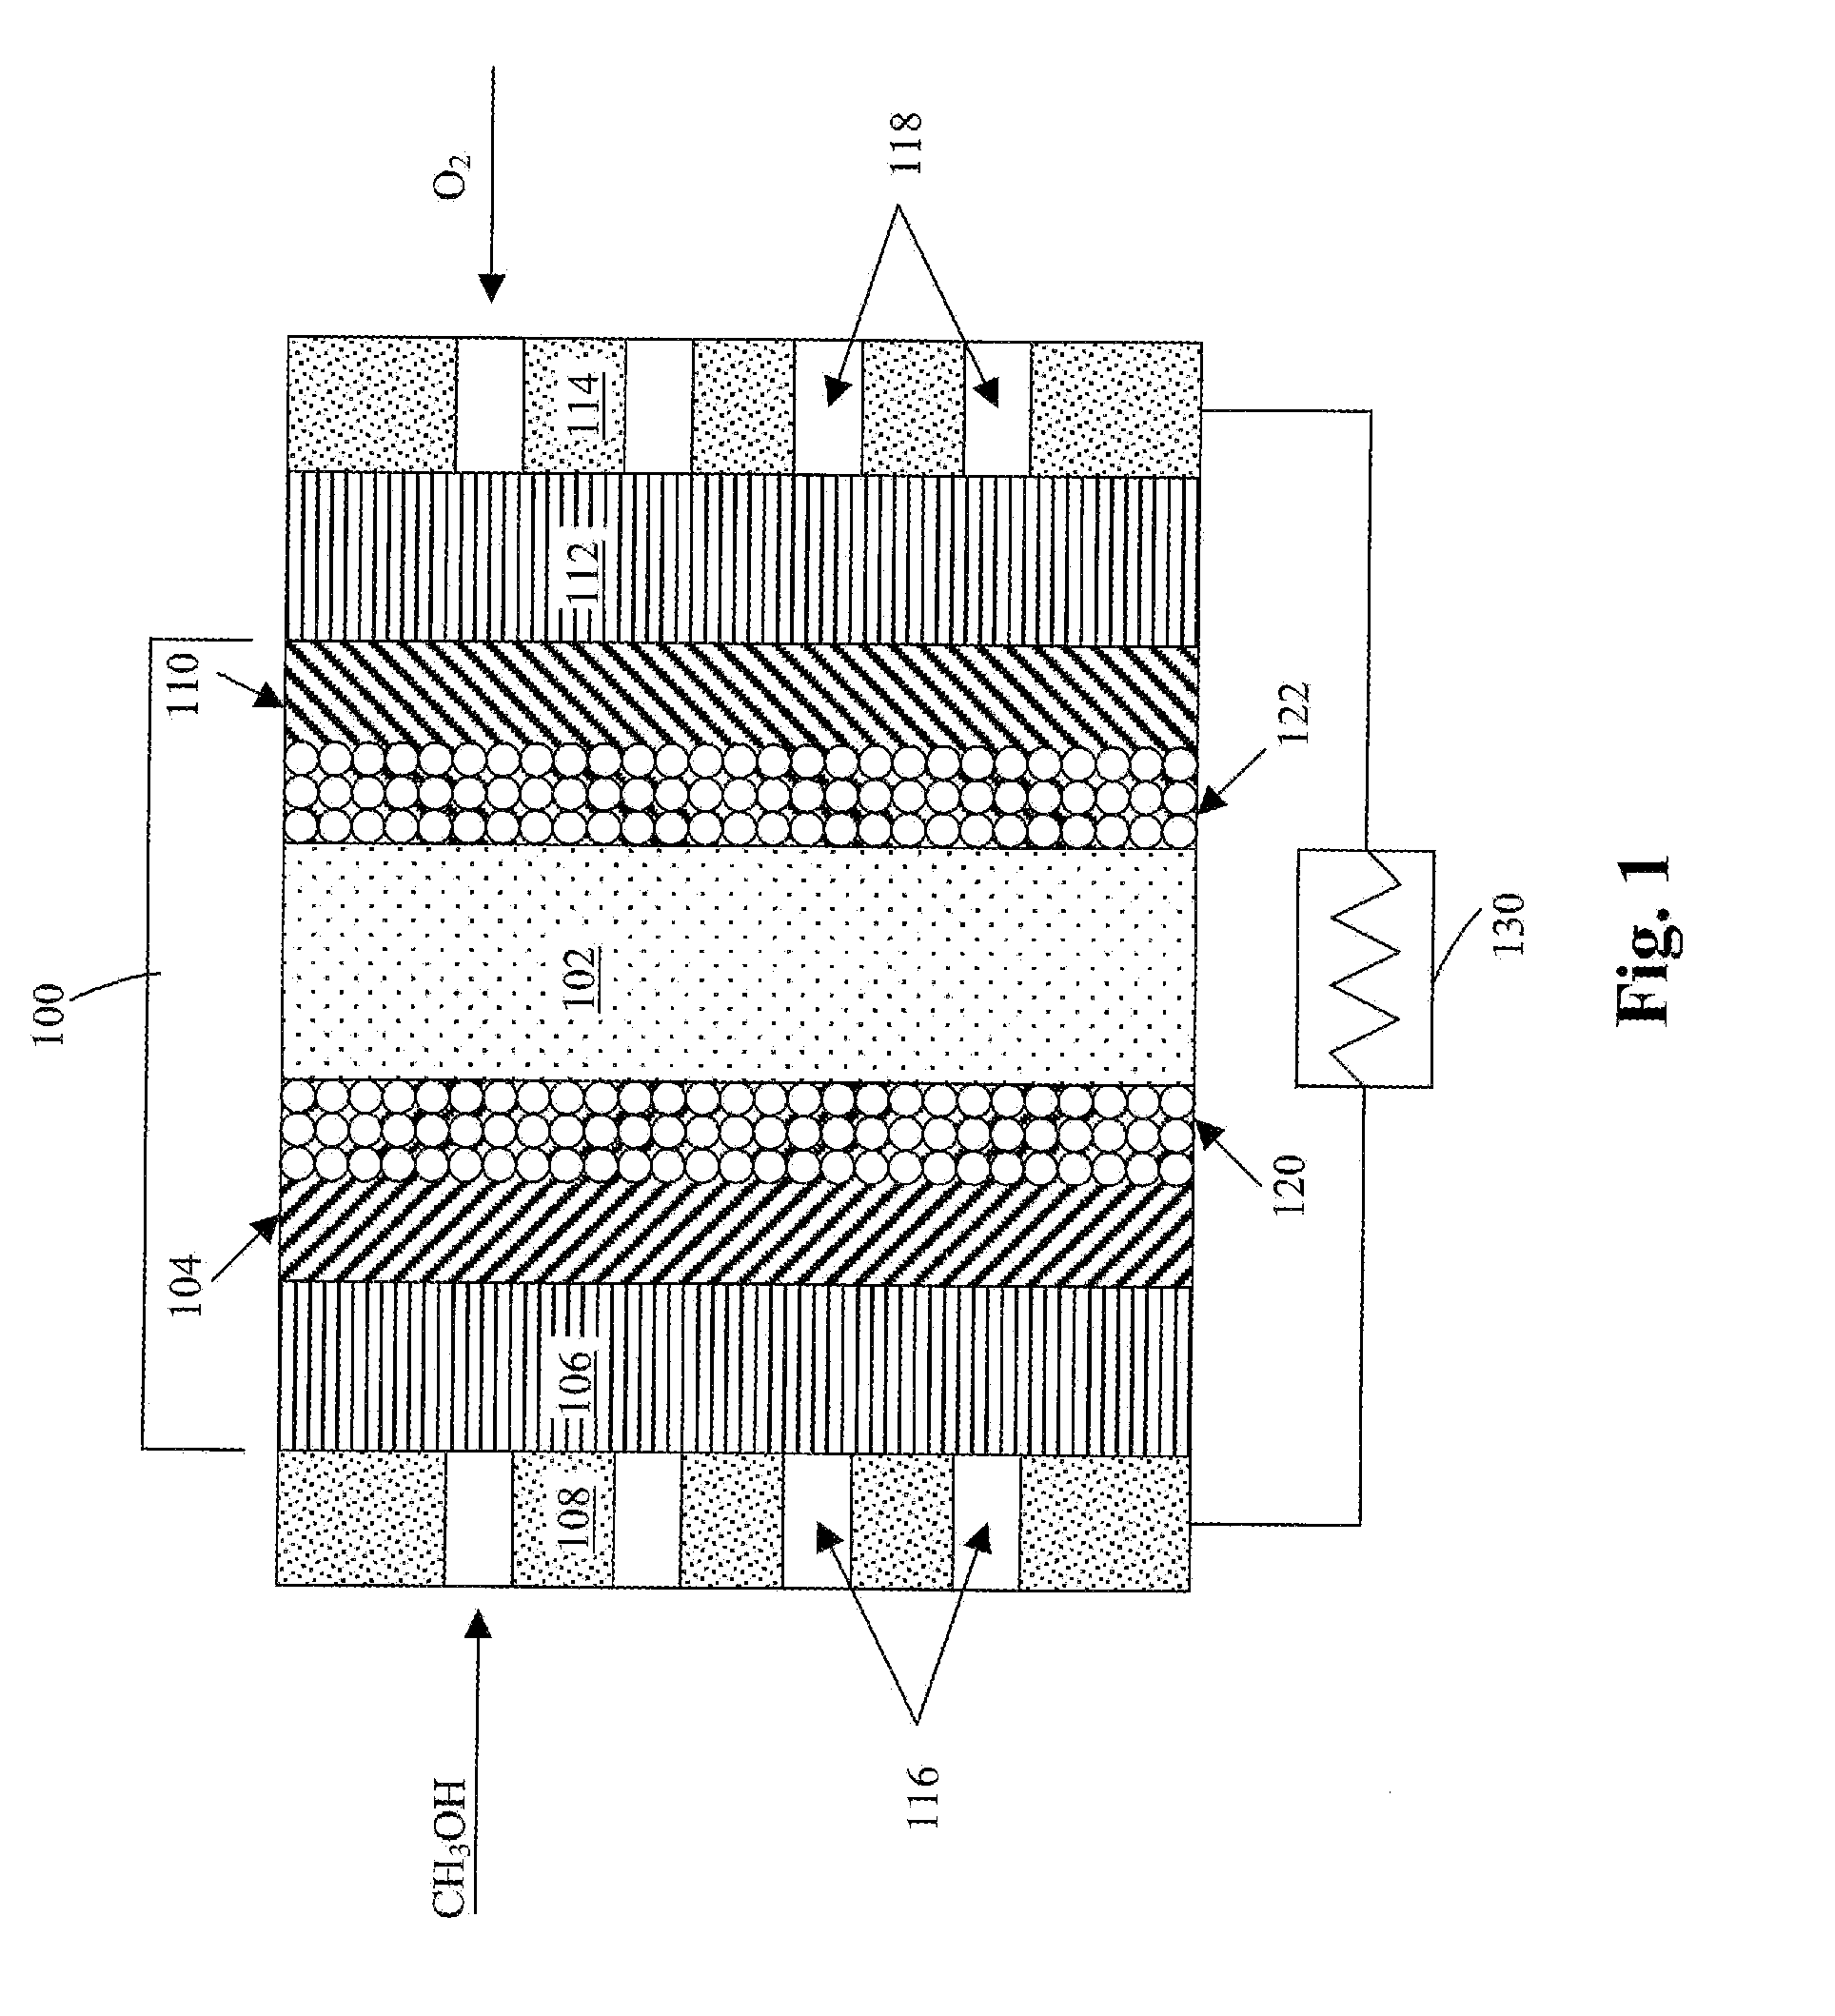 Method of producing membrane electrode assemblies for use in proton exchange membrane and direct methanol fuel cells